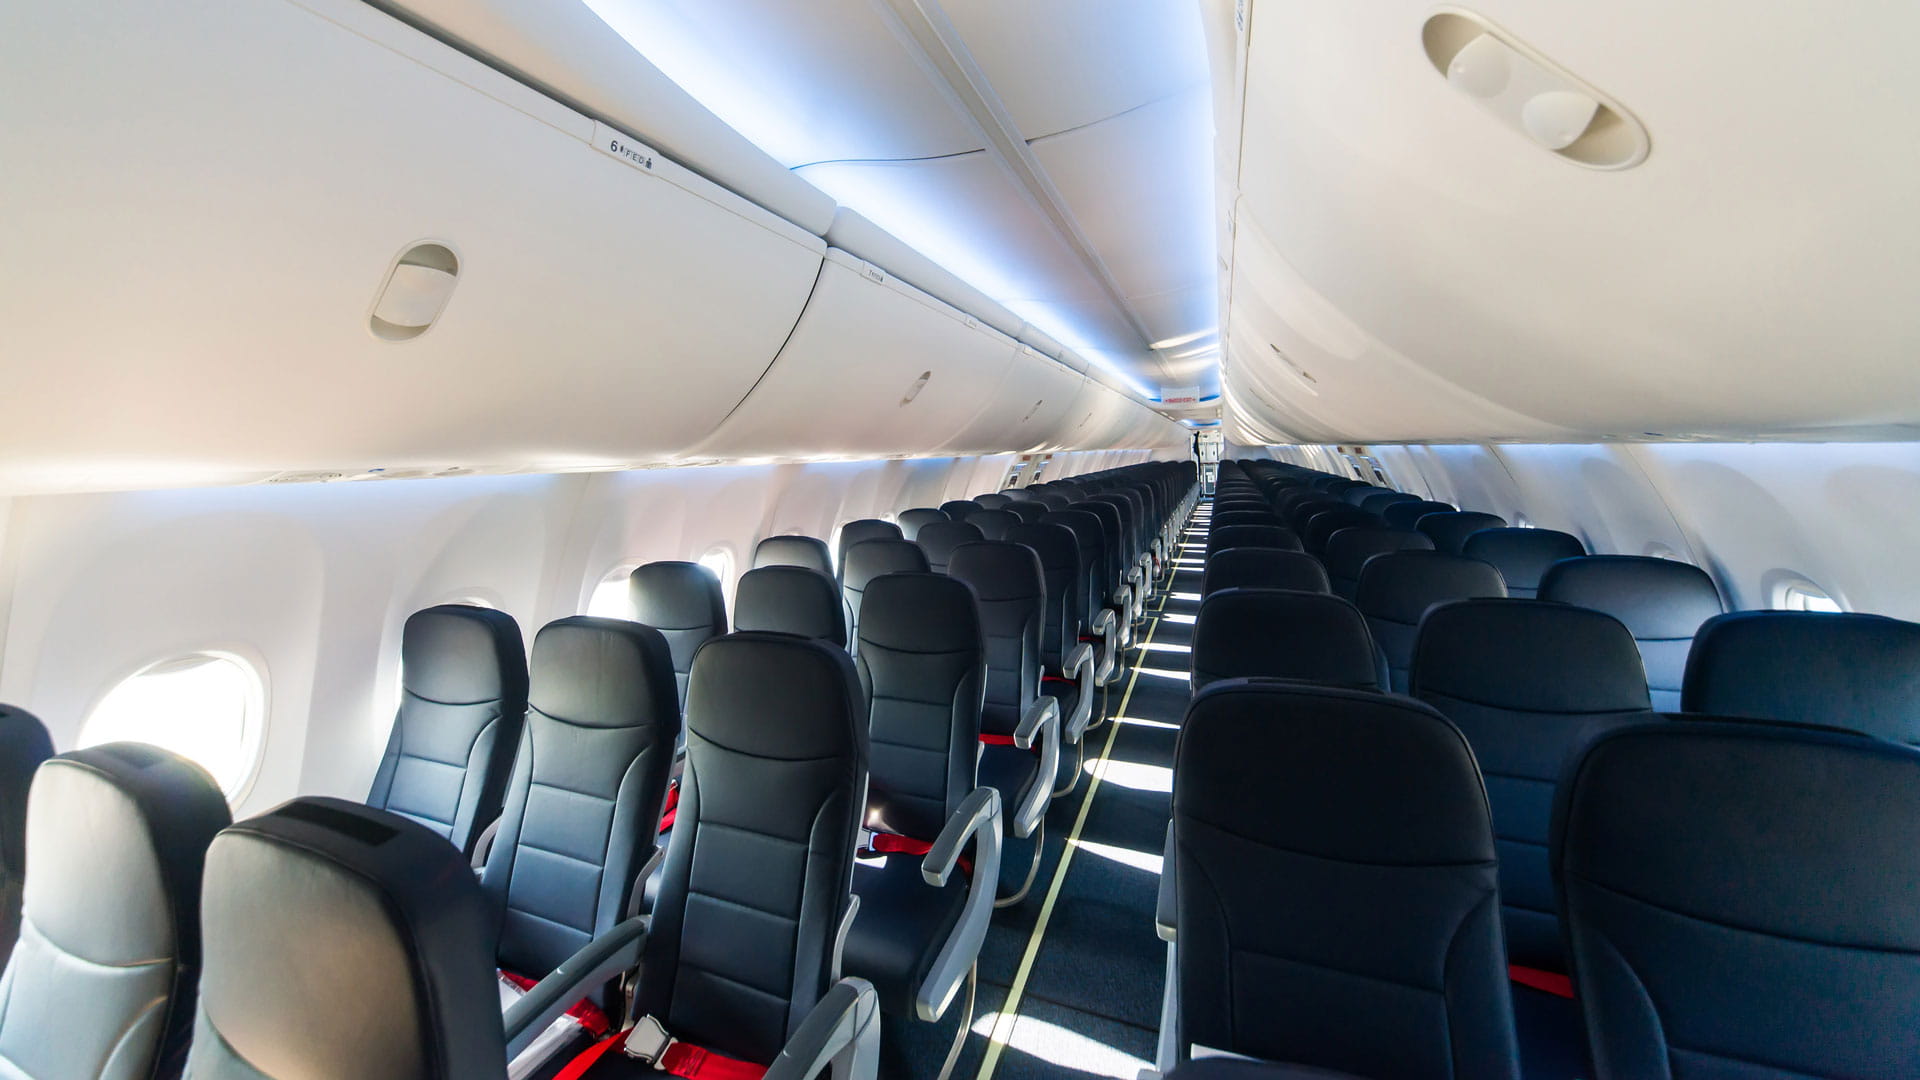 Interior of Boeing 737 aircraft